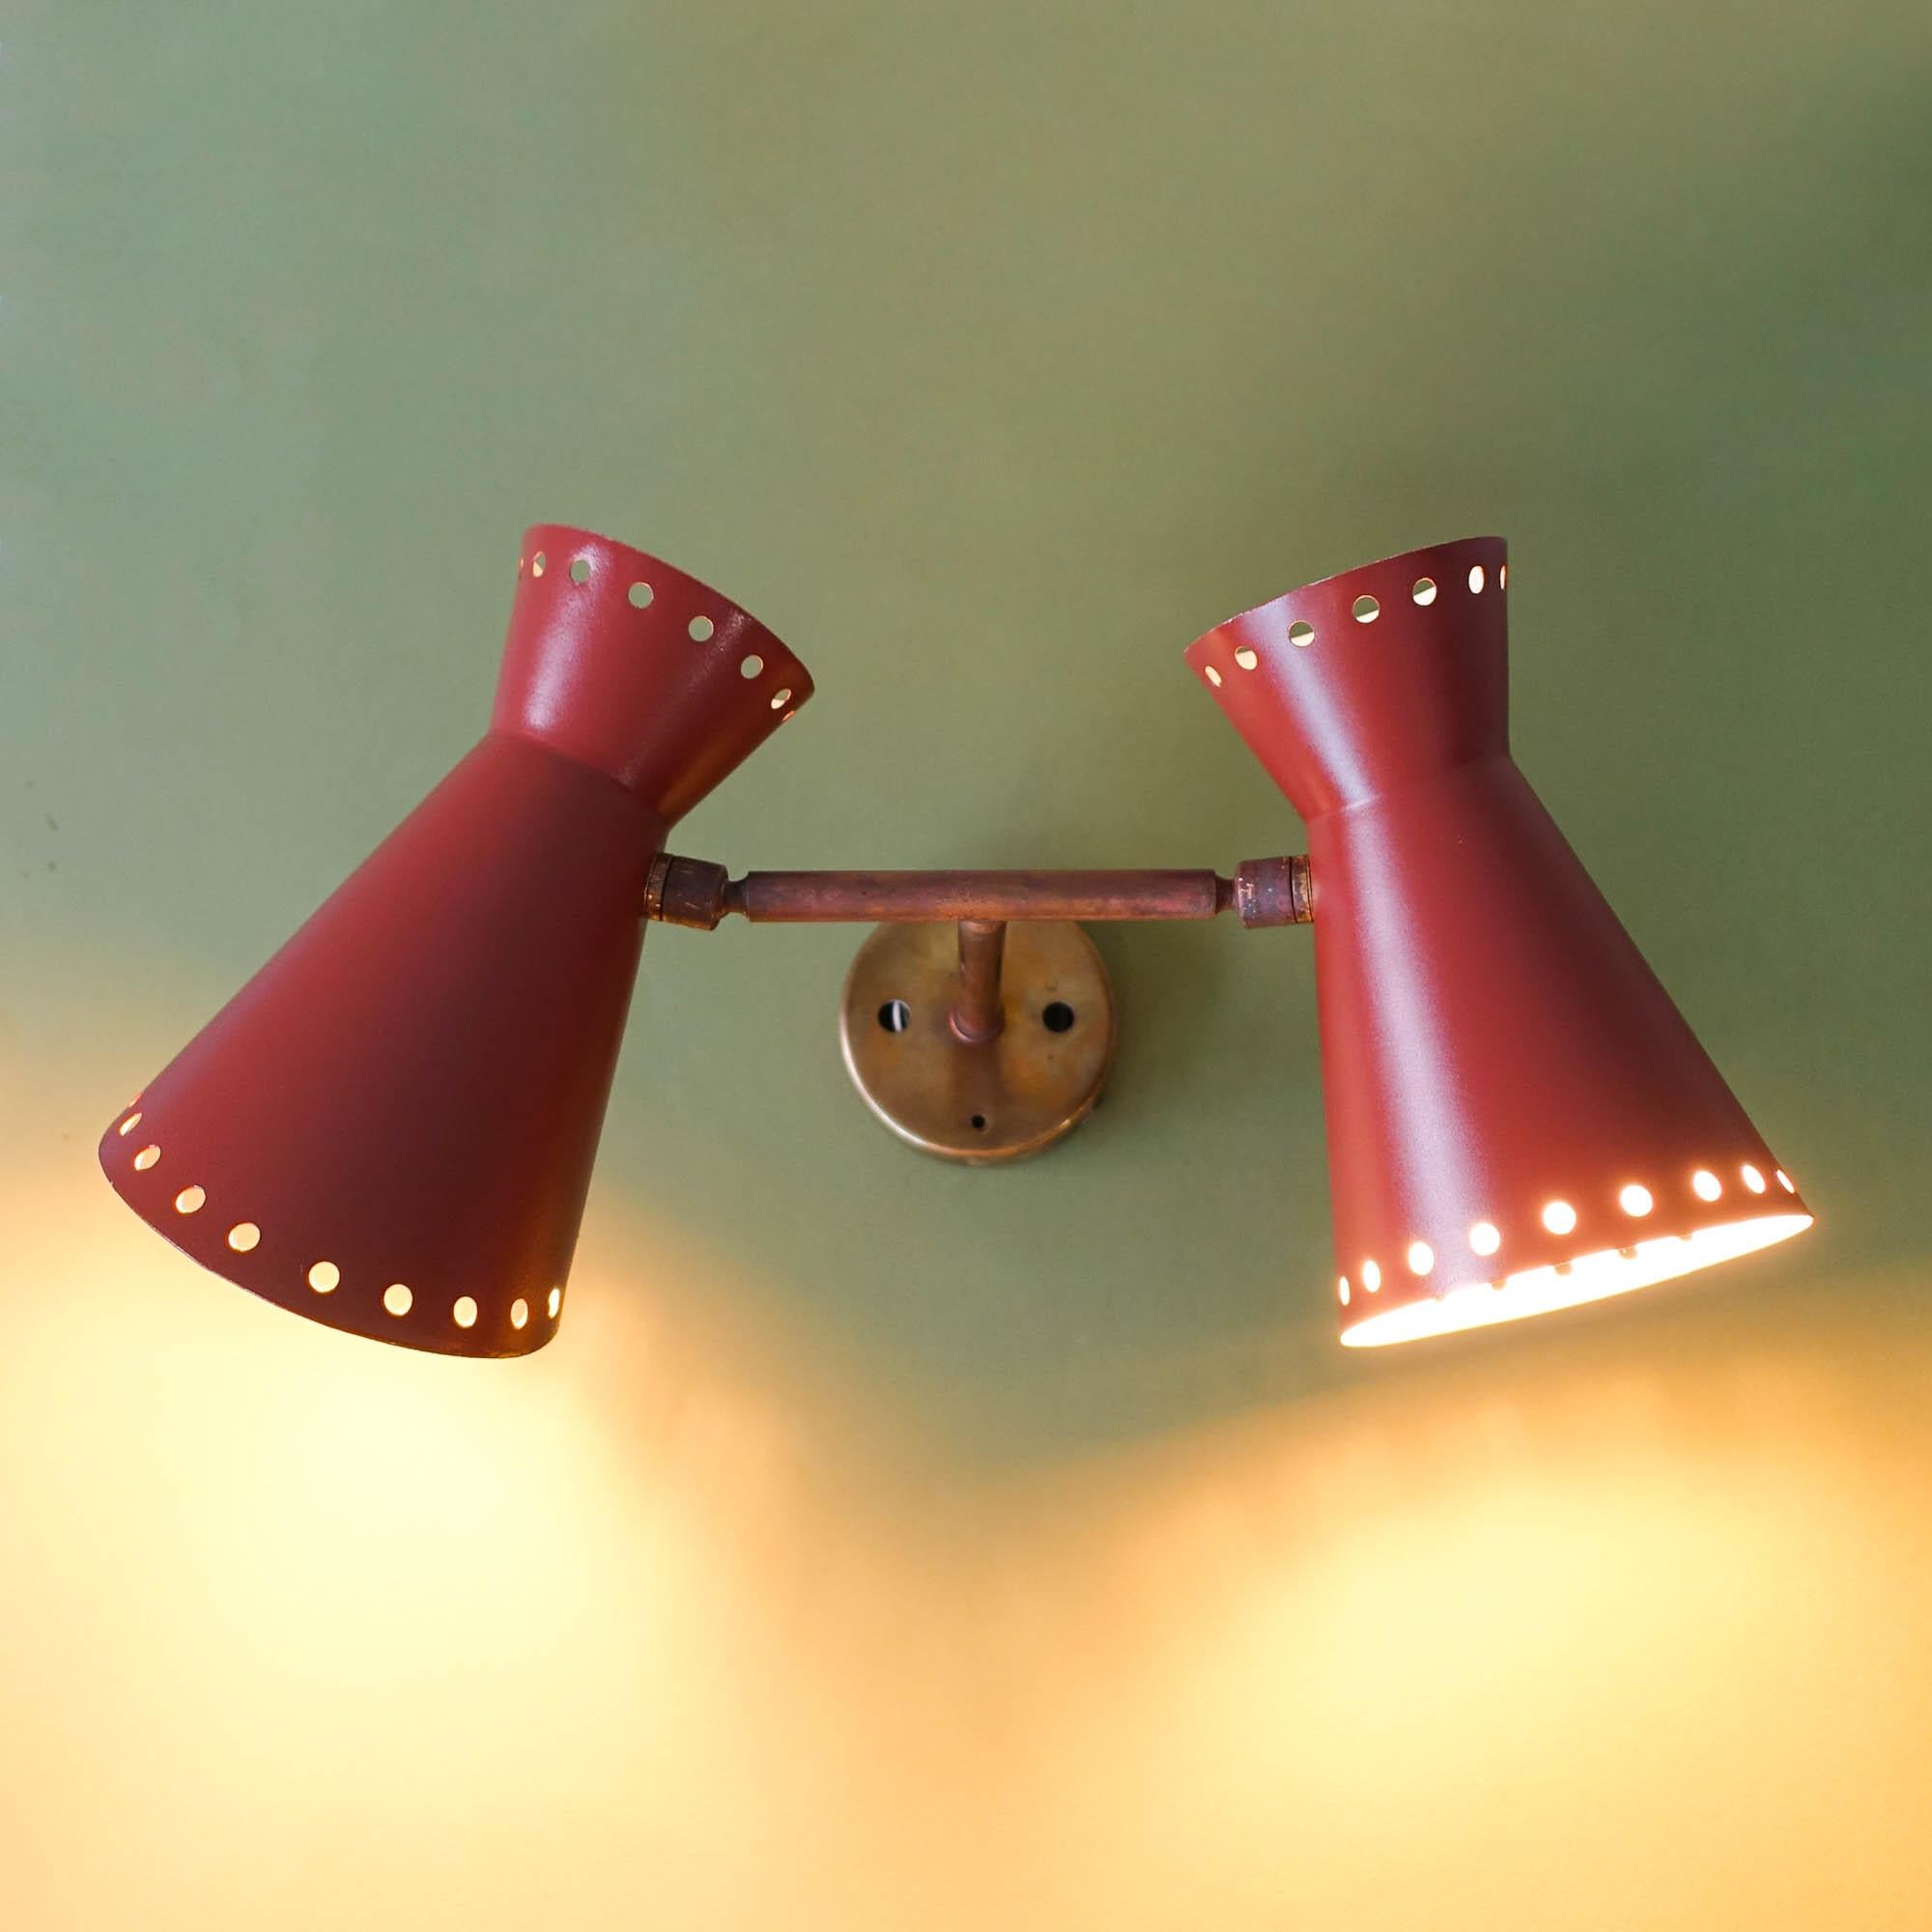 This two shade diabolo wall lamp was designed and produced in France during the 1950's. It has two metal shades, in brown perforated on top and down to spread the light. Each cone mounts one bulb. The three lampshades are attached to a brass arm